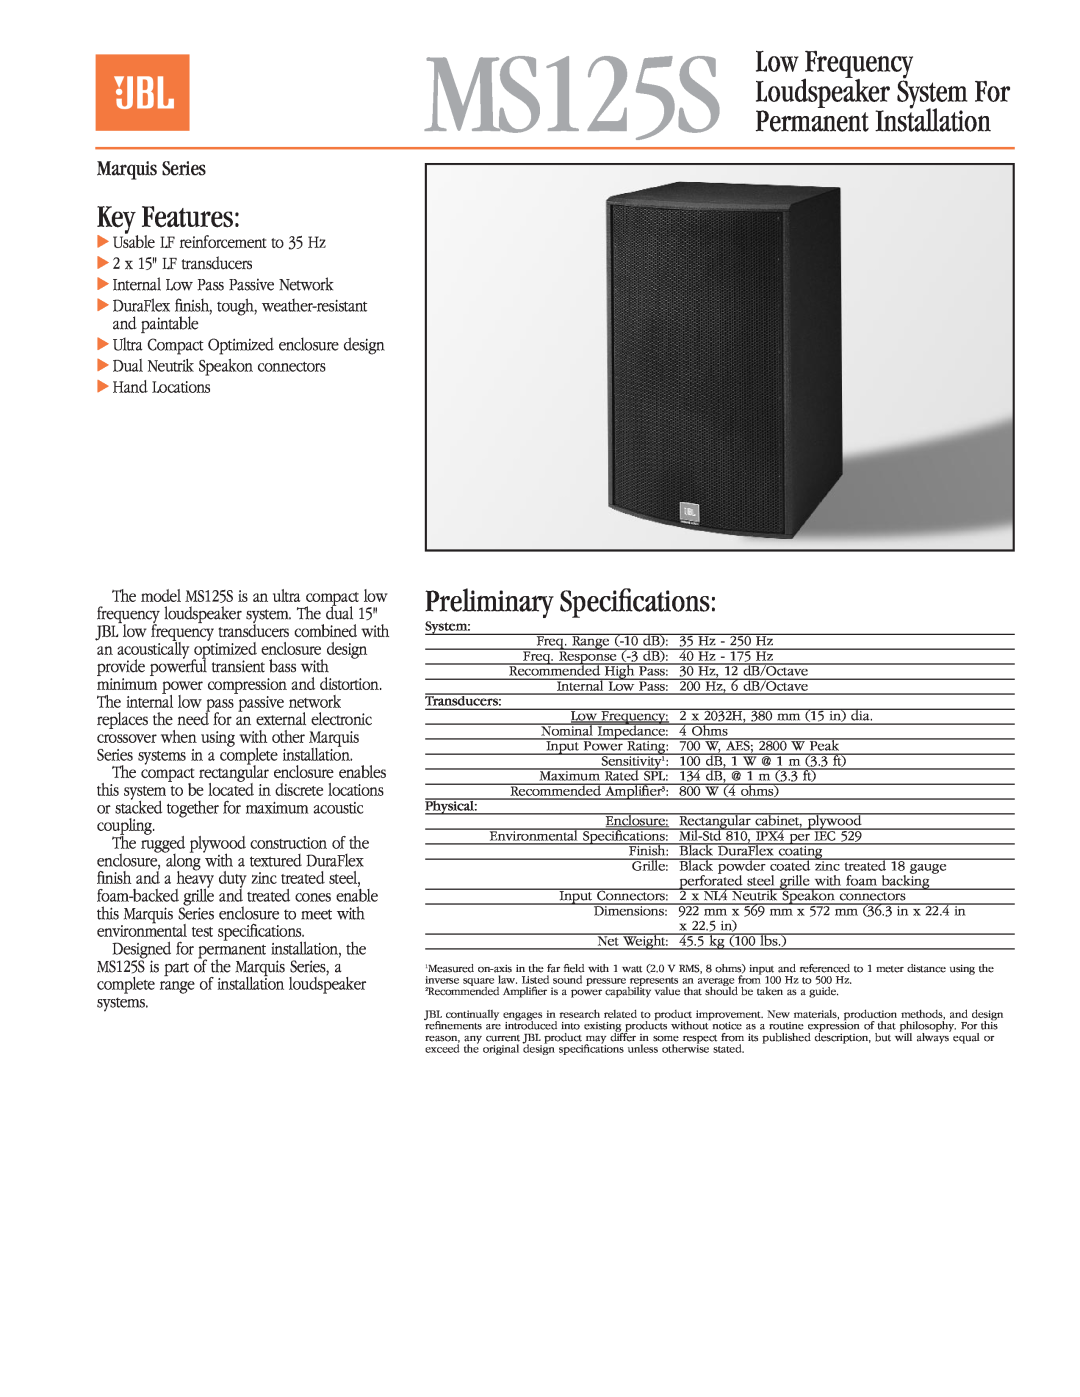 JBL specifications MS125S Low Frequency Loudspeaker System For Permanent Installation, Key Features, Marquis Series 